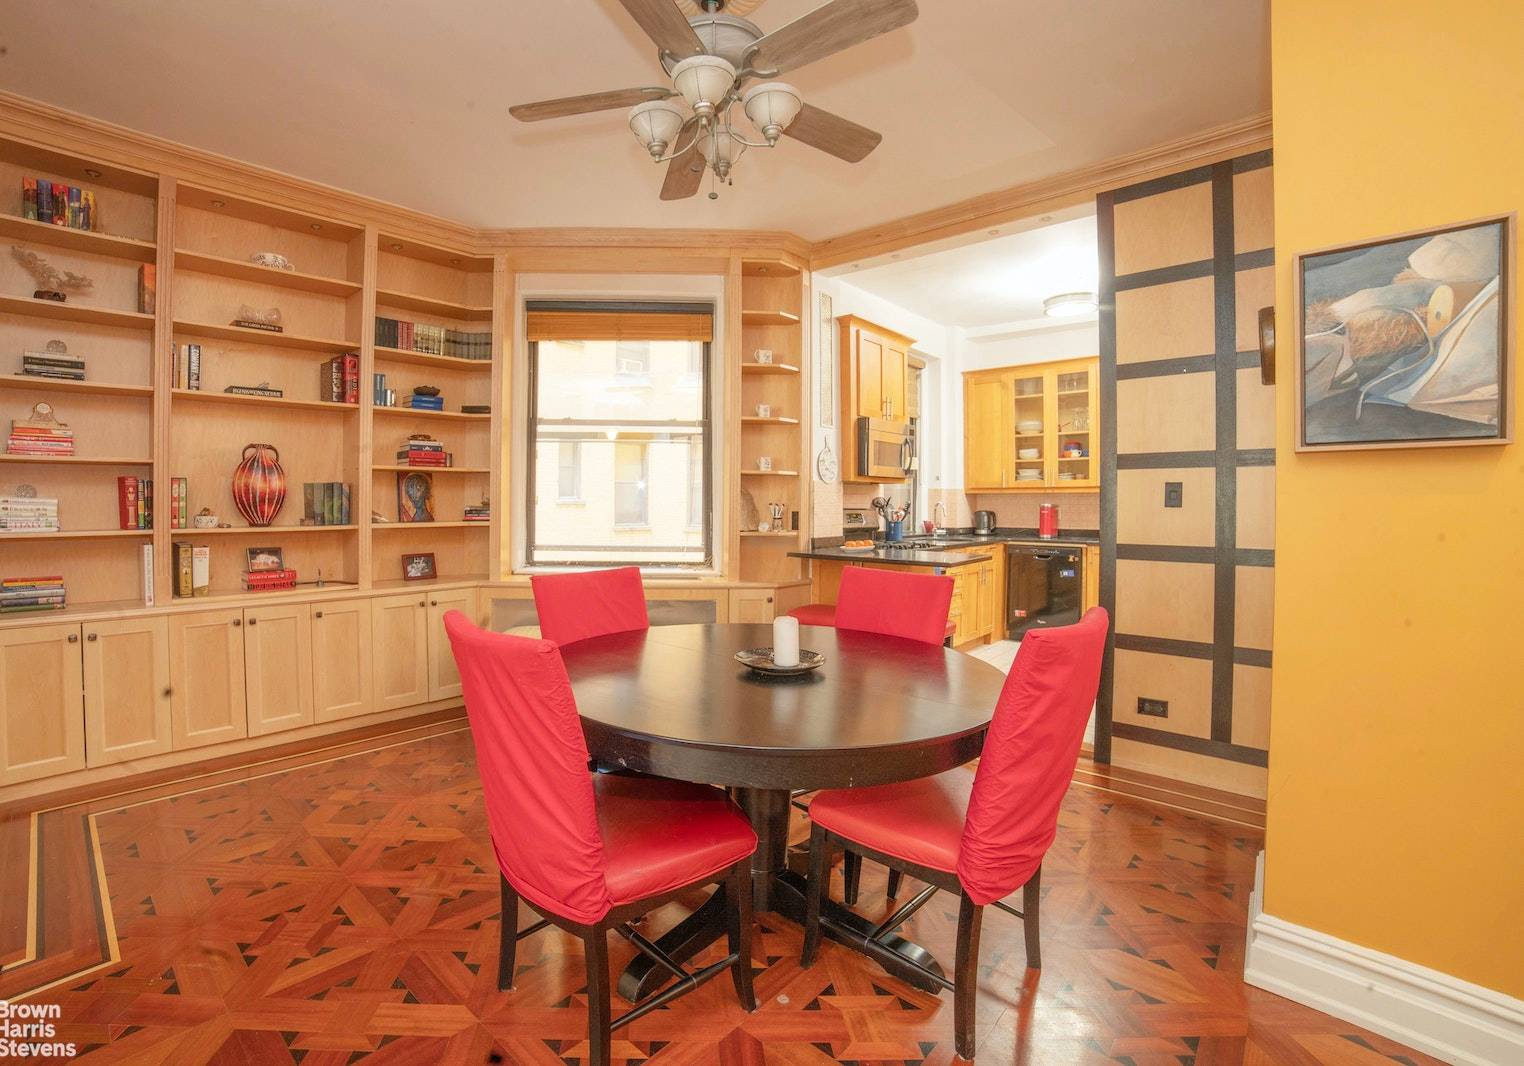 Experience the Upper West Side lifestyle at its finest with this exquisite 3 4 bedroom gem on a picturesque, tree lined street.